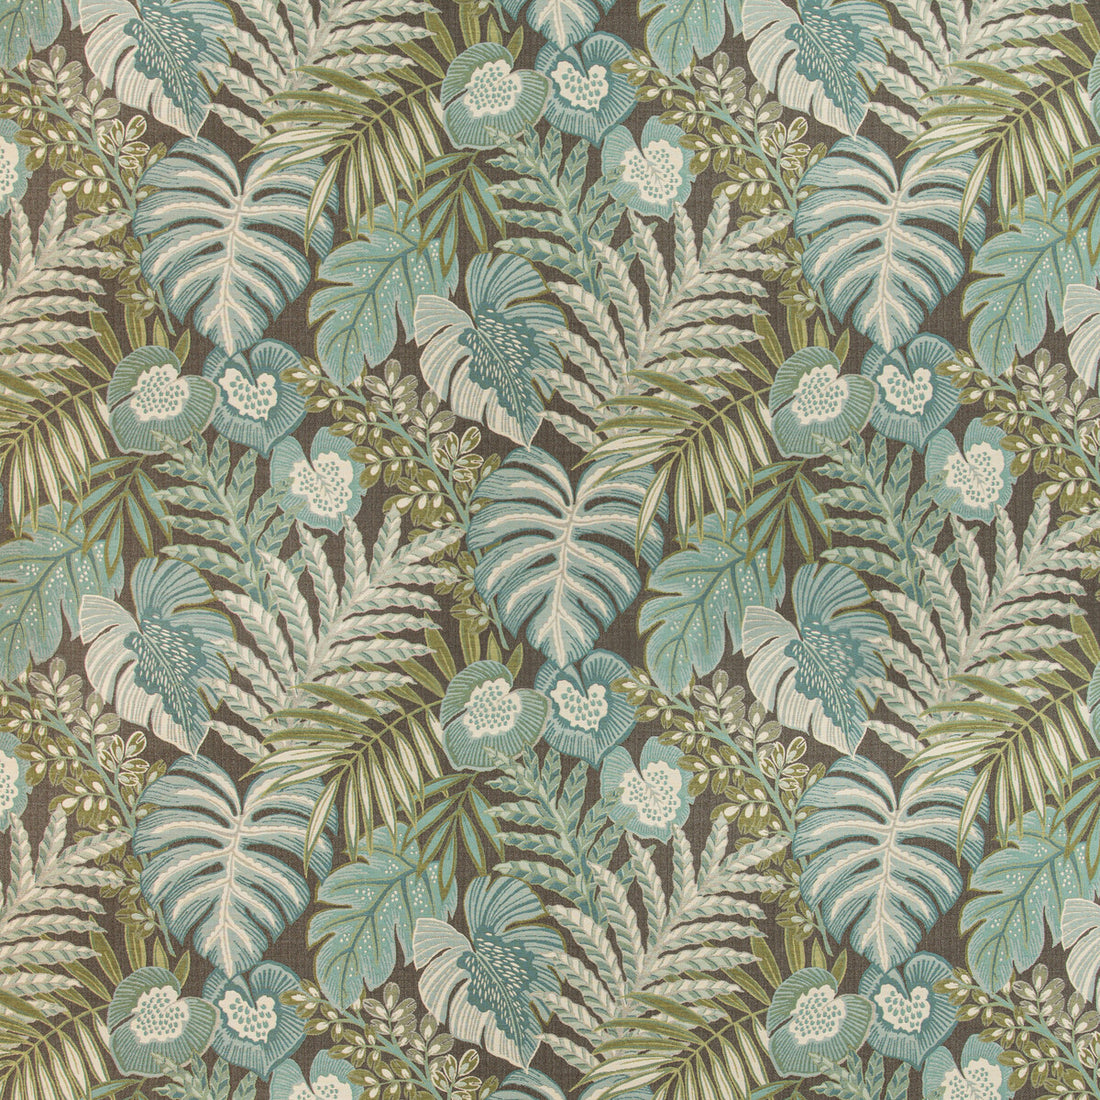 Sanur fabric in aloe color - pattern 35824.3.0 - by Kravet Design in the Indoor / Outdoor collection